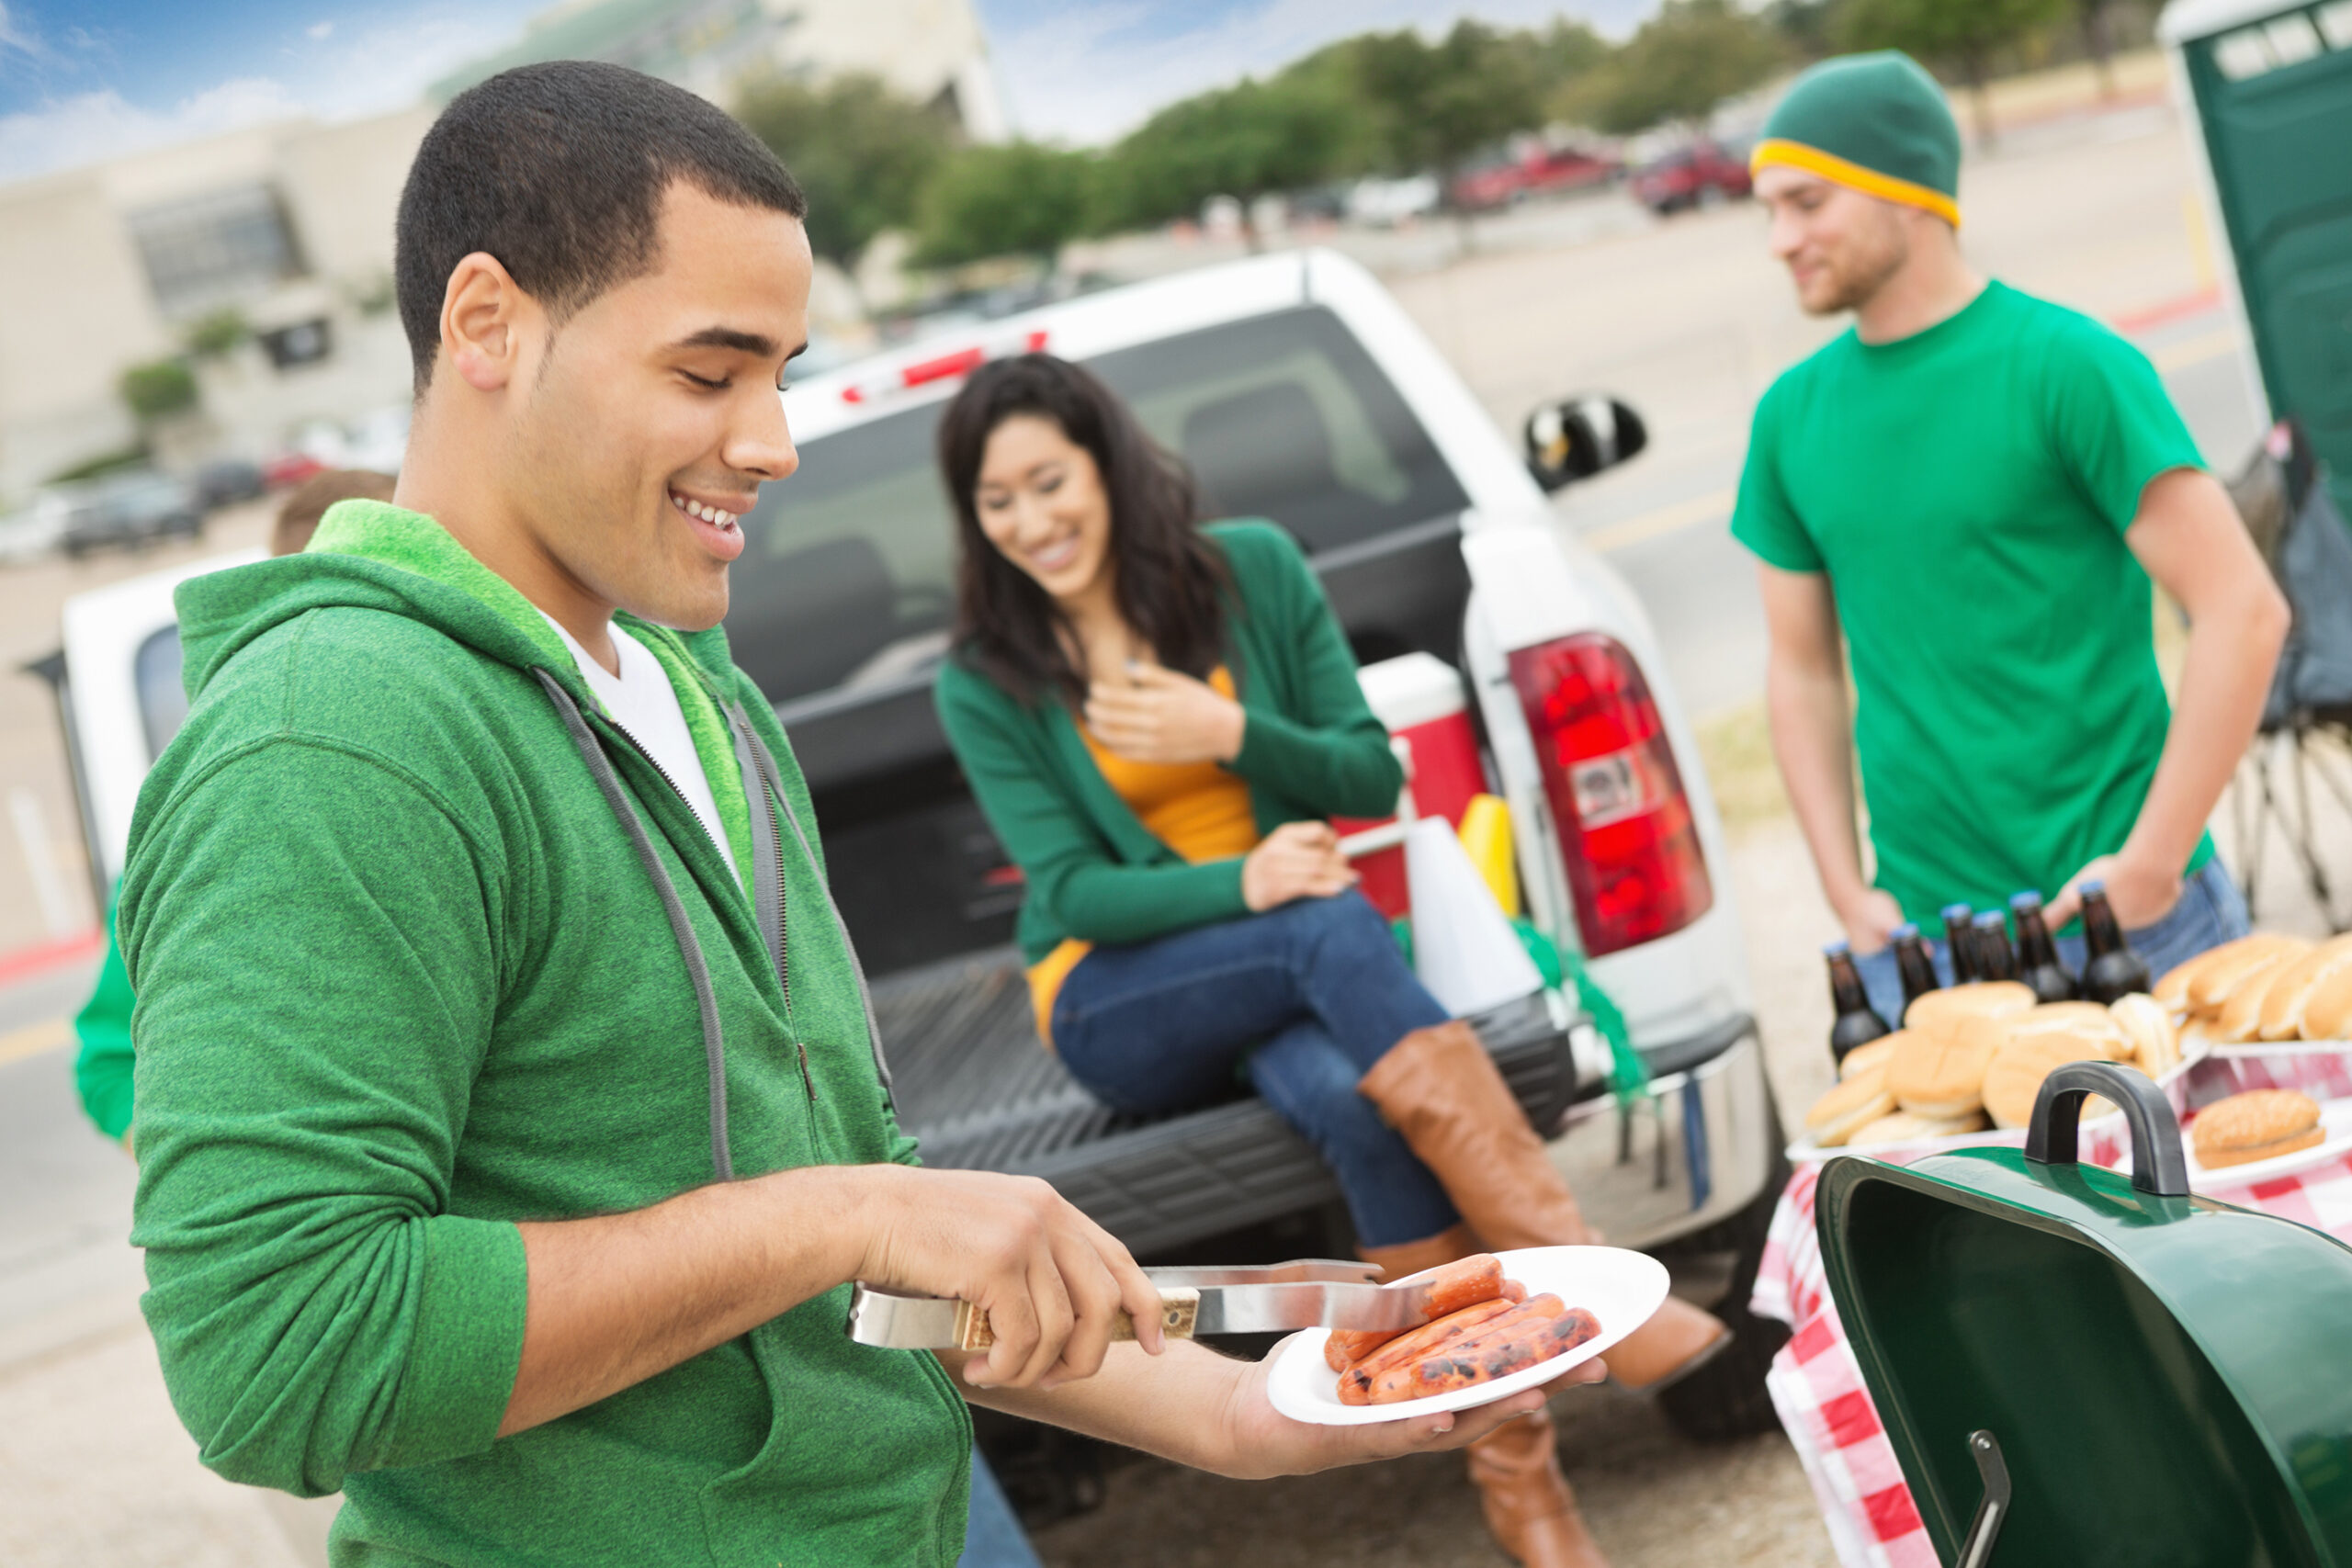 Young man grilling during tailgating party near football stadium